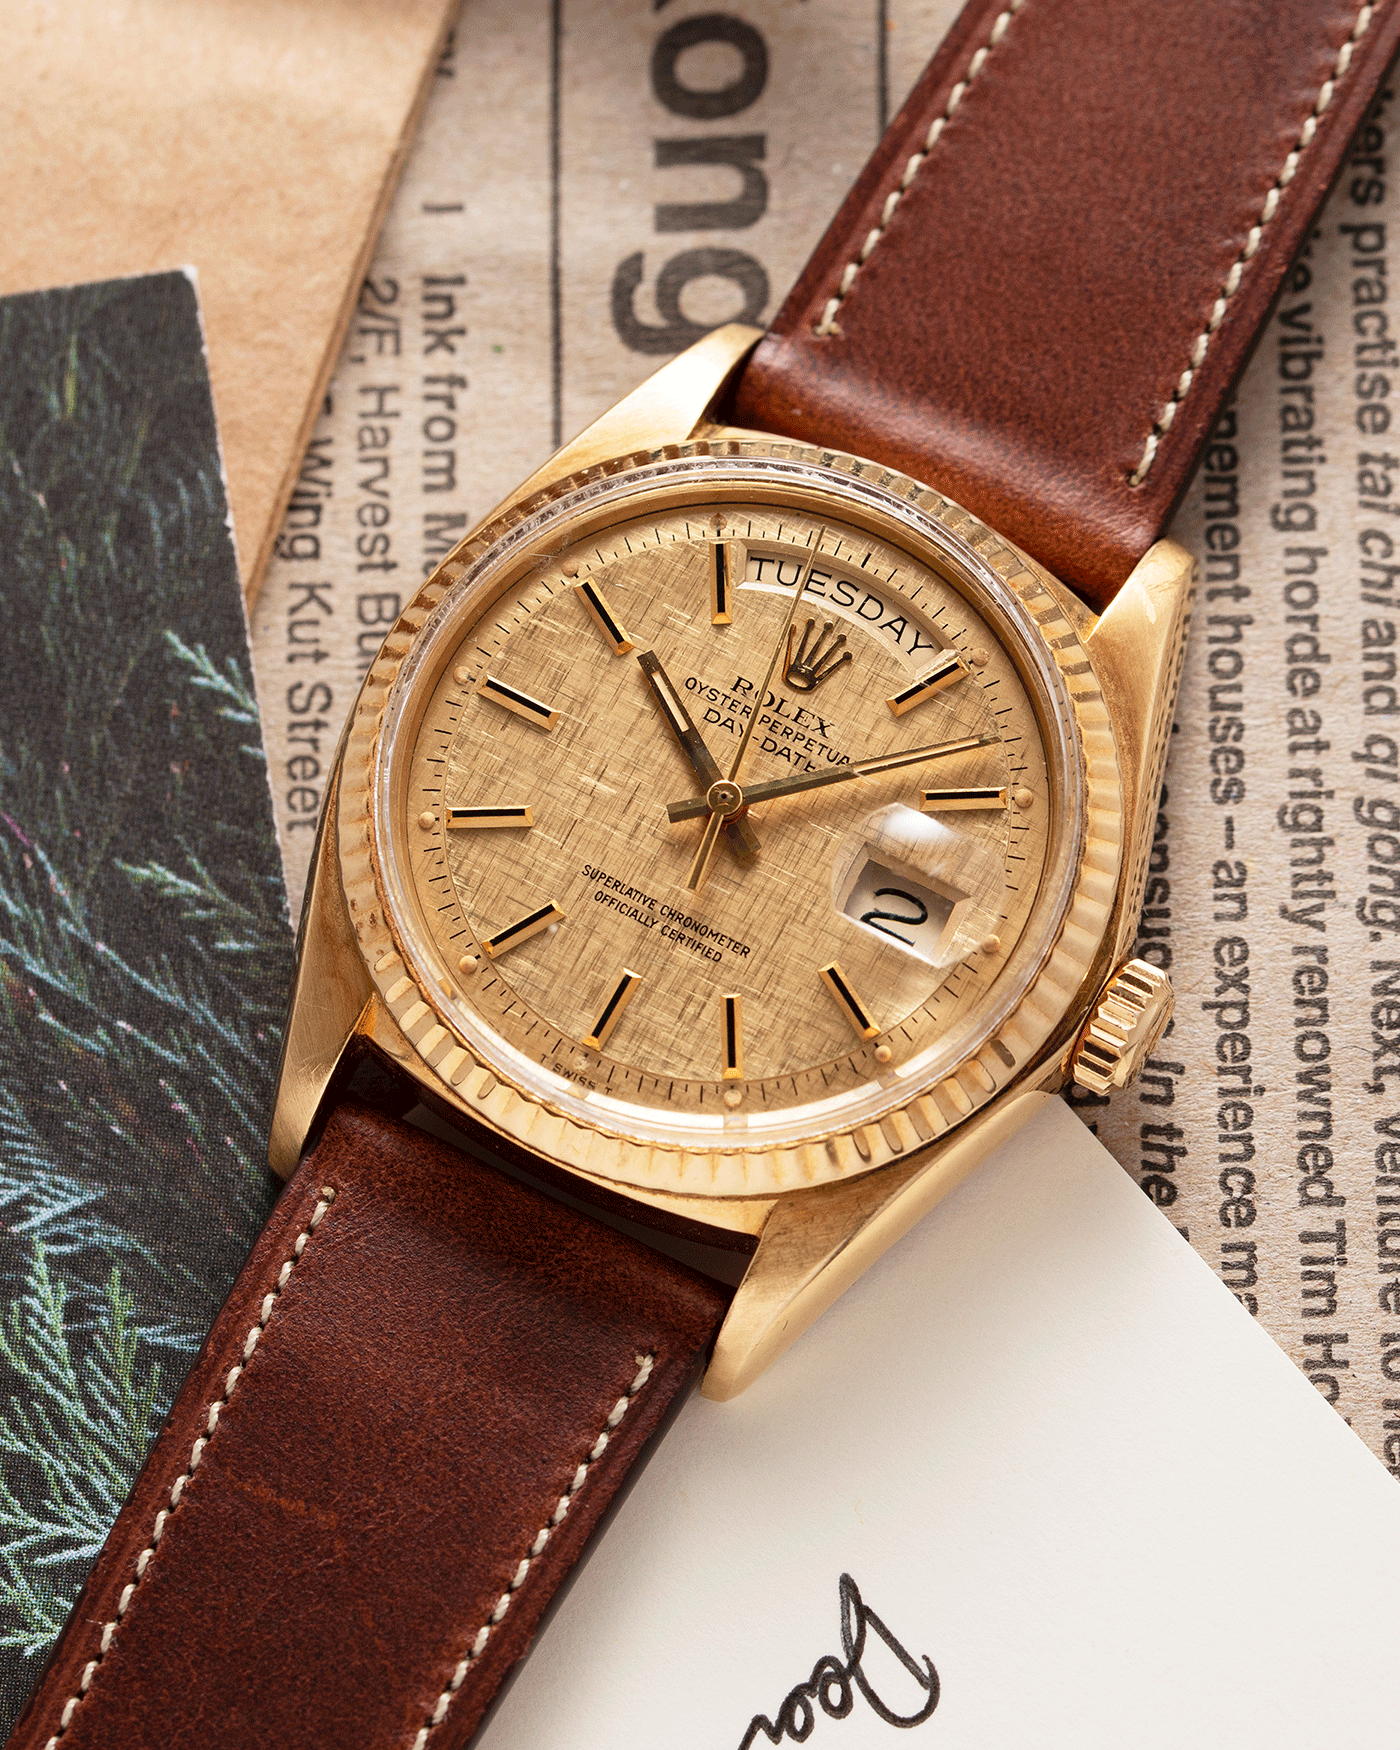 Brand: Rolex Year: 1978 Model: Day Date Reference Number: 1803 Serial Number: 5089385 Material: 18k Yellow Gold Movement: Cal. 1555 Case Diameter: 36mm Lug Width: 20mm Bracelet/Strap: Nostime Tobacco Brown Horween Shell Cordovan